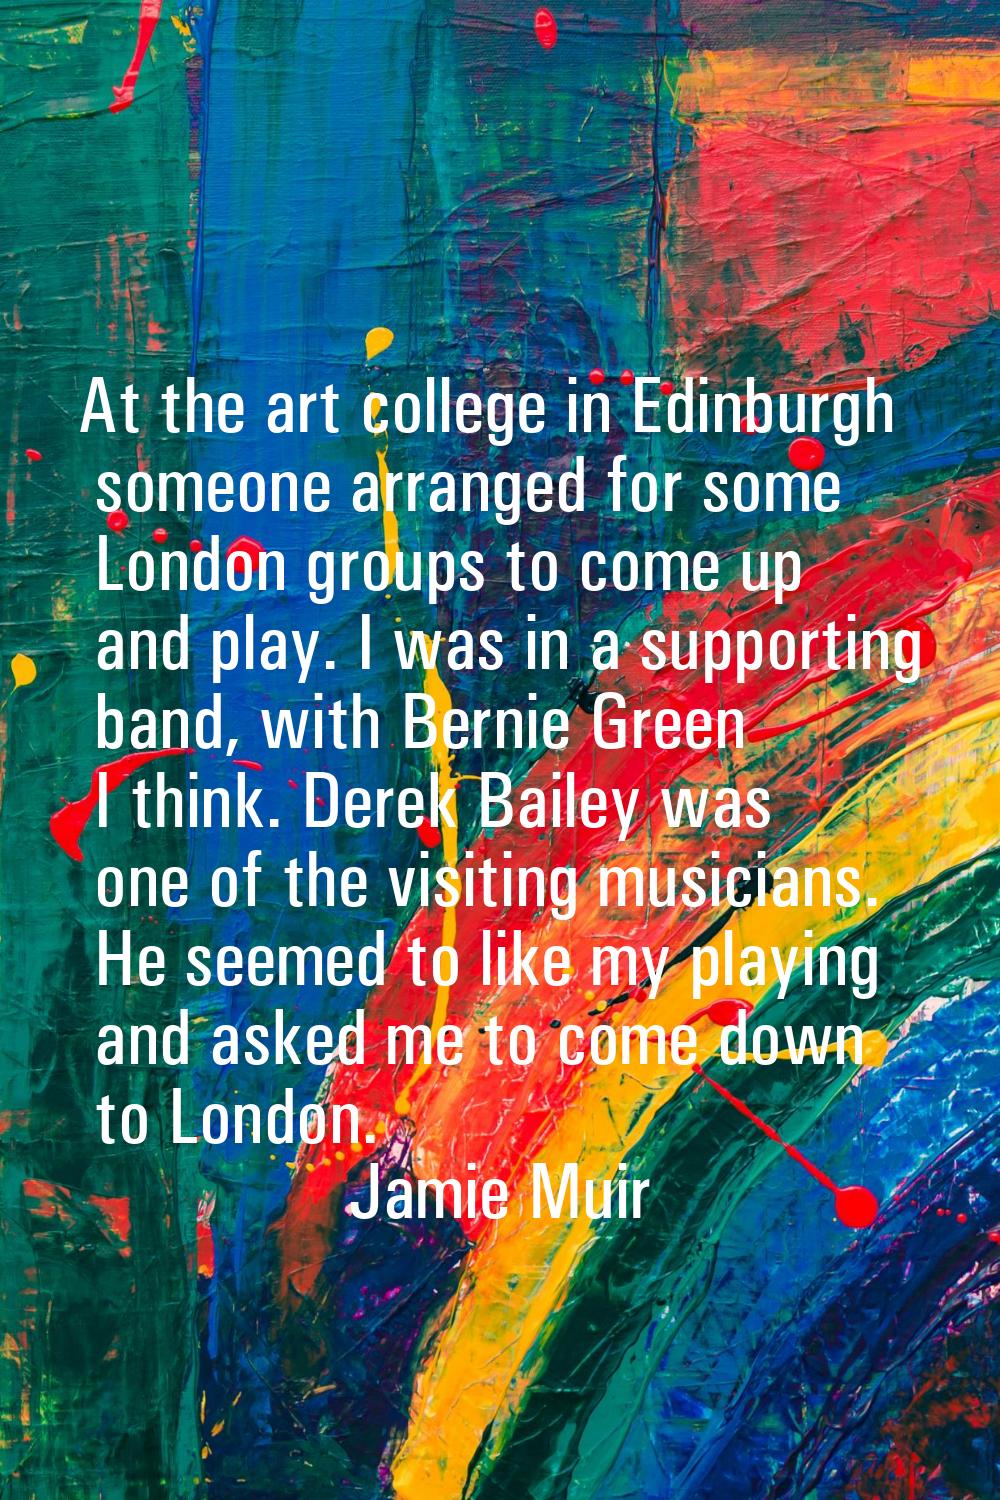 At the art college in Edinburgh someone arranged for some London groups to come up and play. I was 